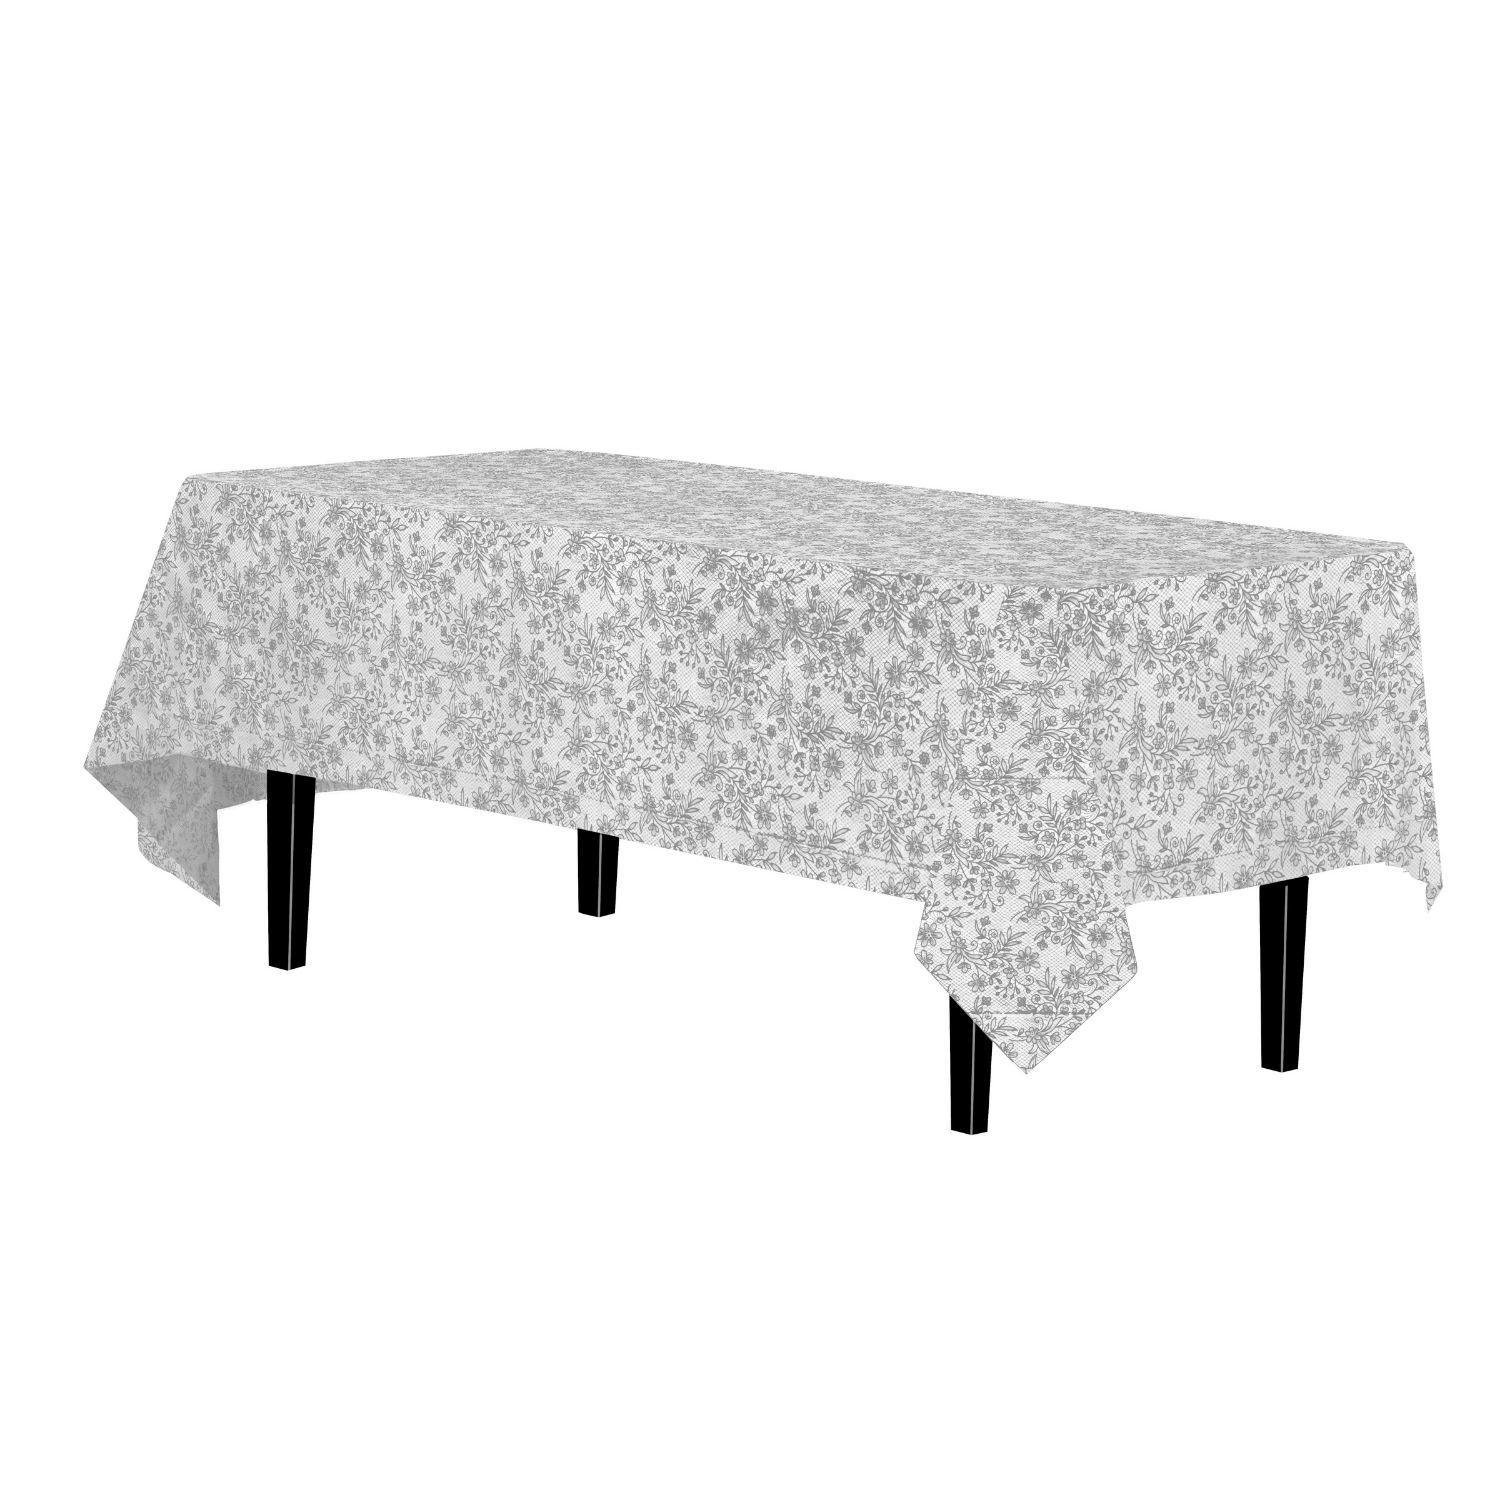 54in. x 108in. Printed Plastic Table cover Silver Floral - 48 ct.